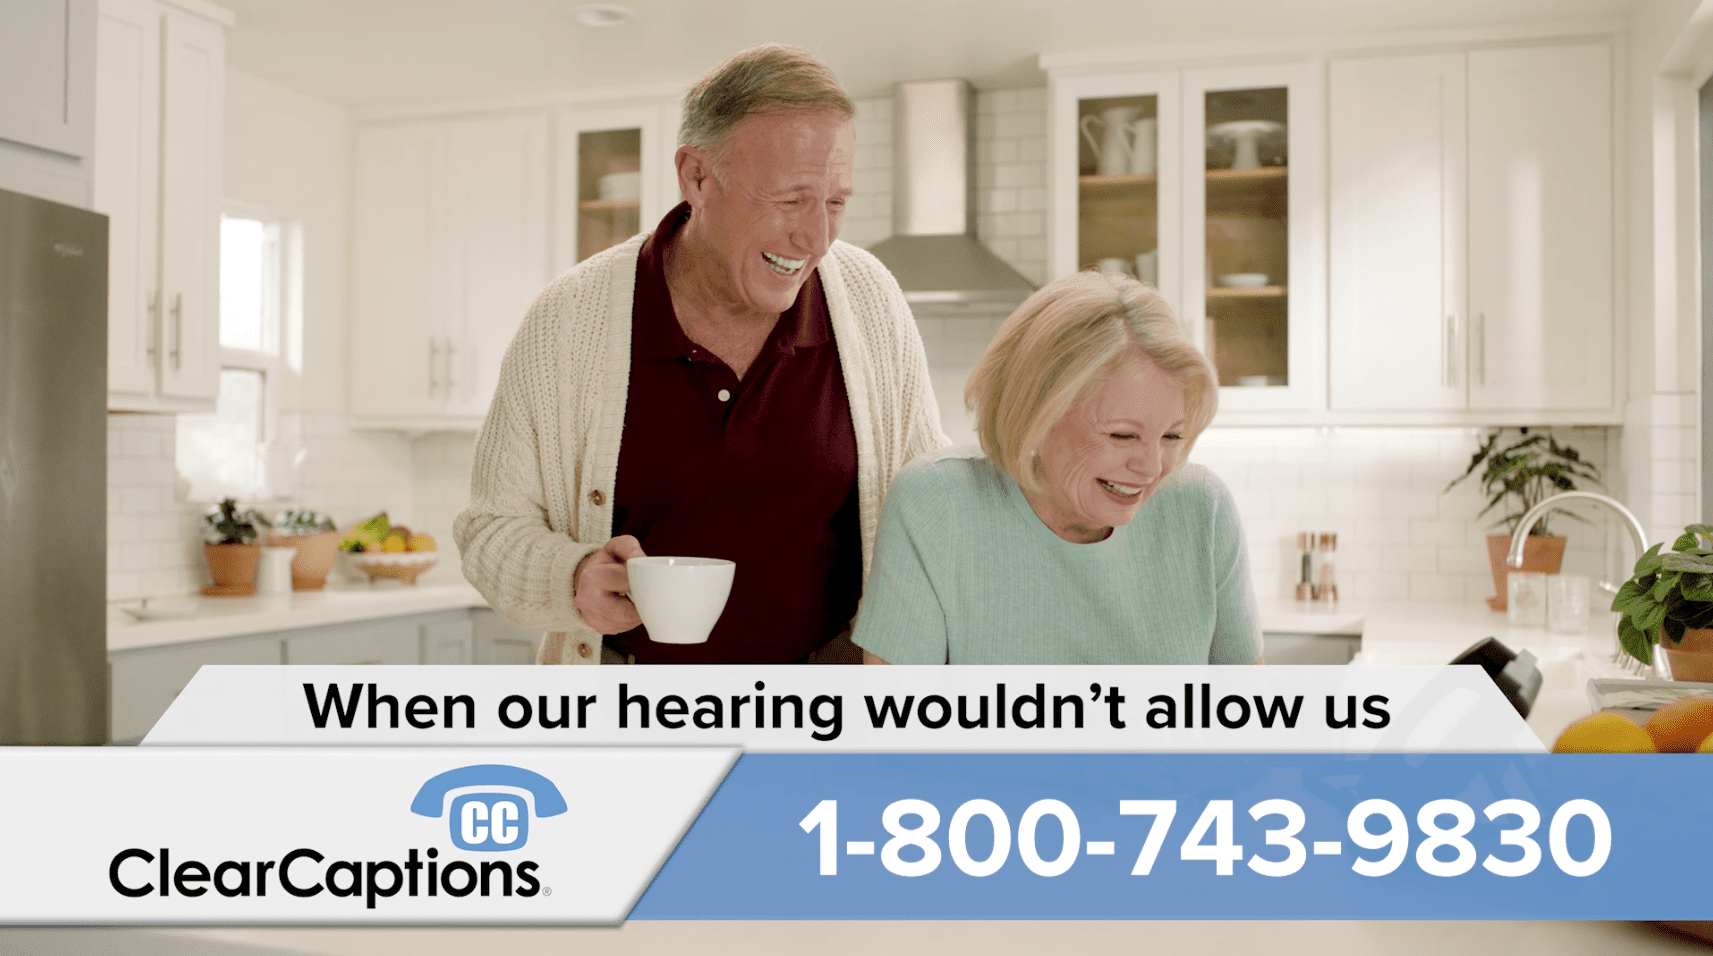 Retired couple in their kitchen talking on clearcaptions phone. Play Clear Captions commercial.